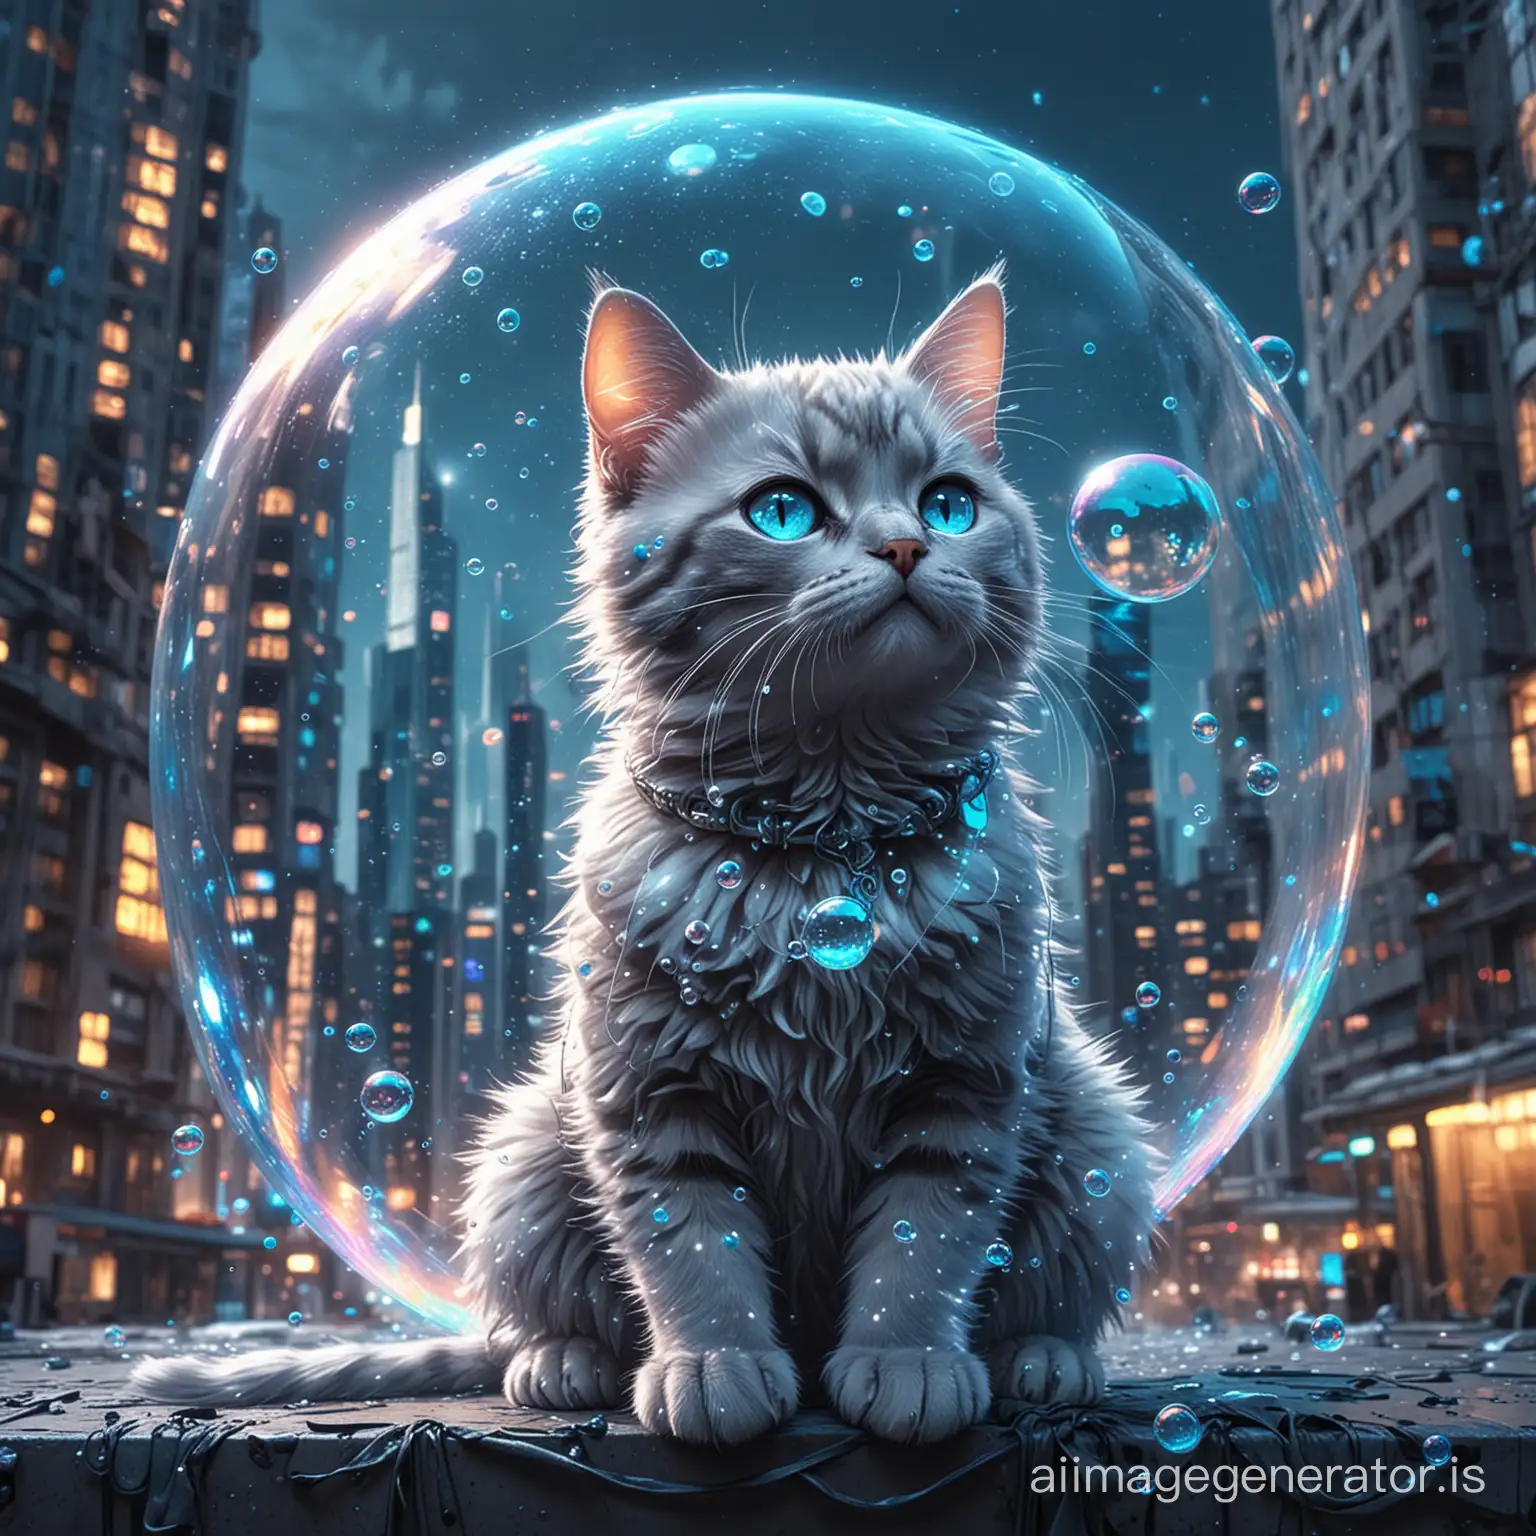 Cyberpunk-Cat-Surrounded-by-Glowing-Blue-Bubbles-in-Urban-HighRise